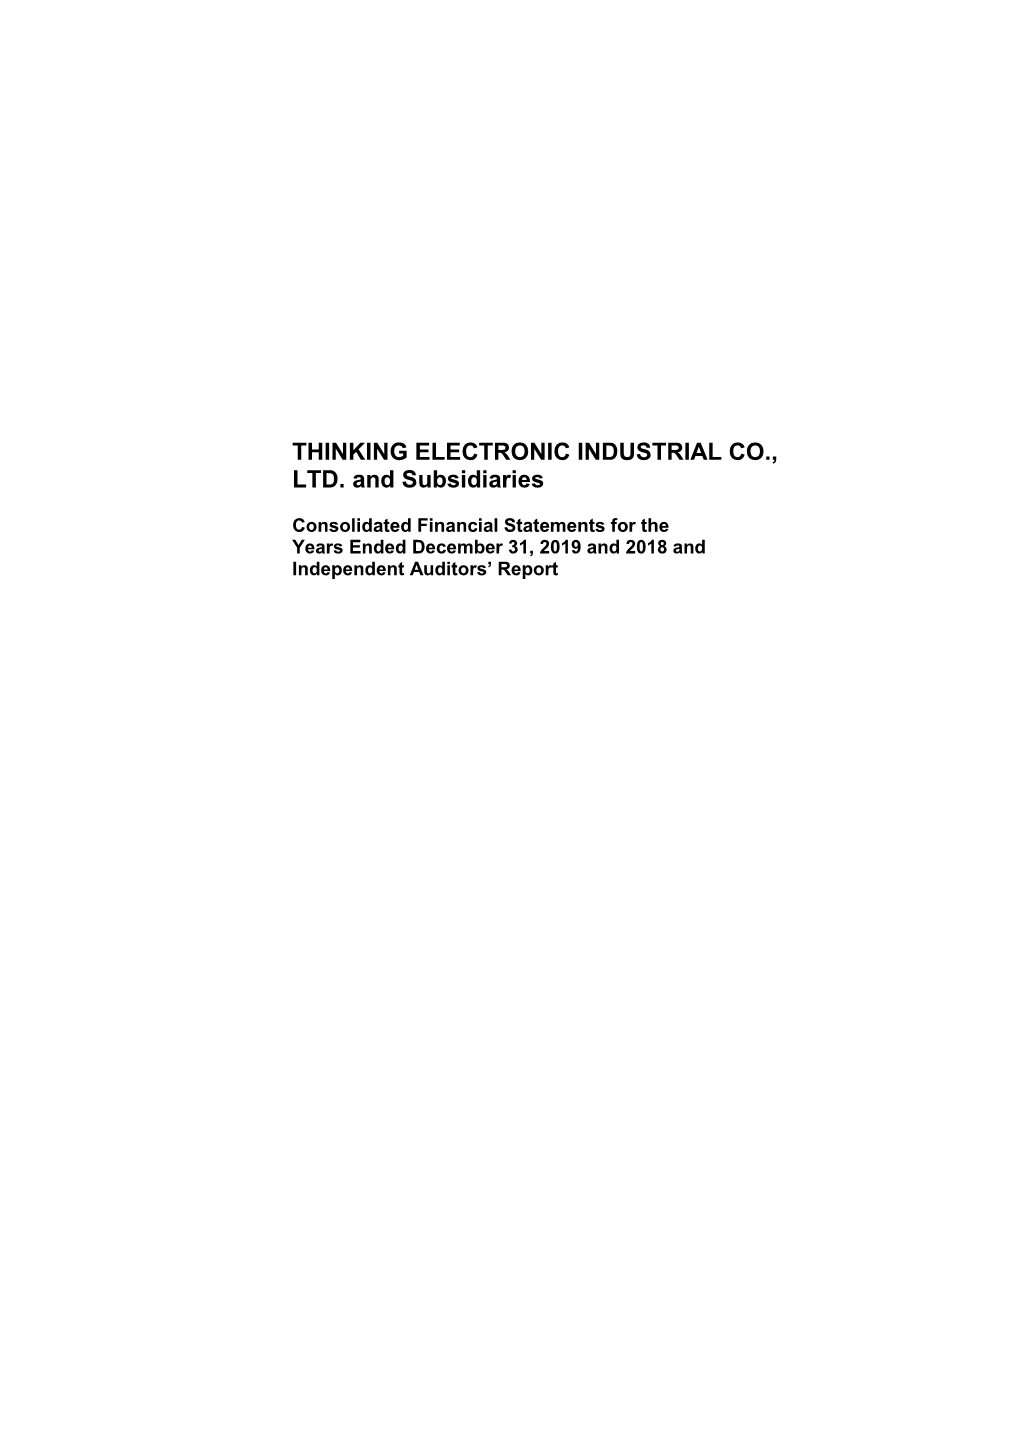 THINKING ELECTRONIC INDUSTRIAL CO., LTD. and Subsidiaries